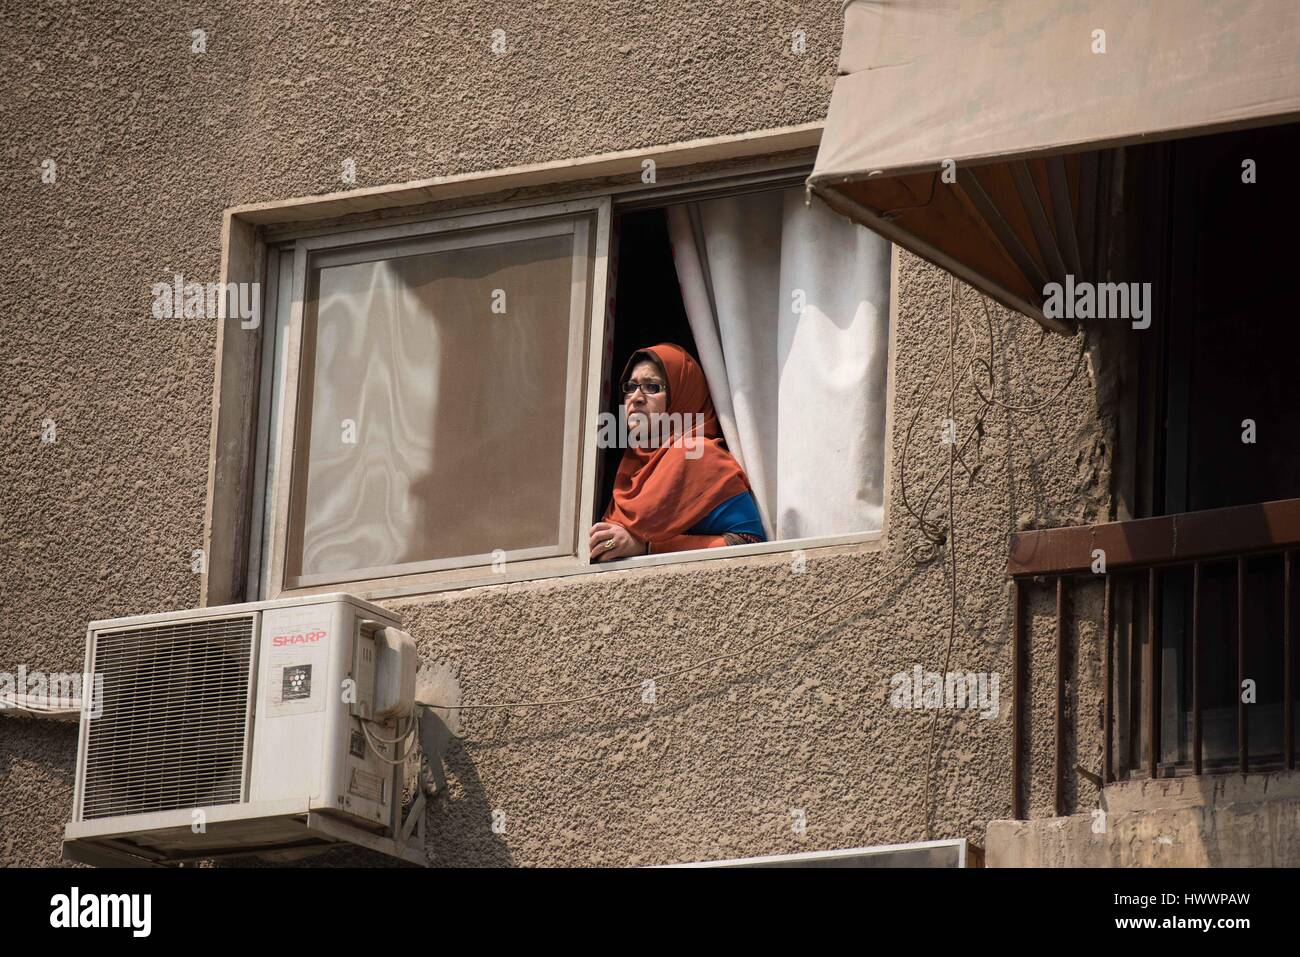 Cairo, Egypt. 24th Mar, 2017. A woman looks out of the window near the explosion site at Maadi district in Cairo, Egypt, March 24, 2017. One person was killed and four others wounded on Friday when an explosive device went off in a garden in Maadi district southeastern the capital Cairo, the interior ministry said in a statement. Credit: Meng Tao/Xinhua/Alamy Live News Stock Photo